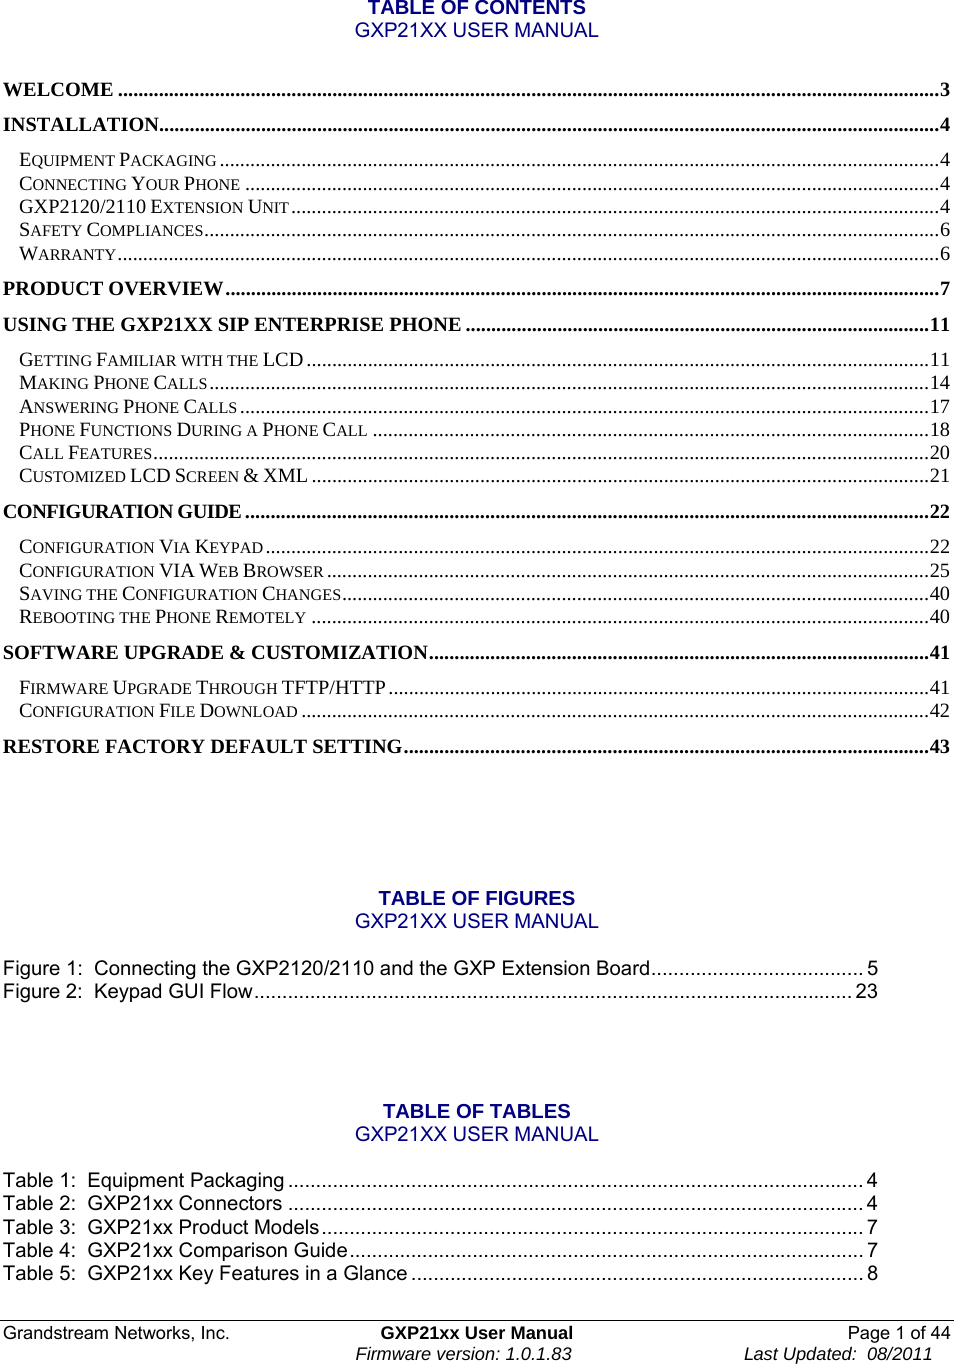 Grandstream Networks, Inc.  GXP21xx User Manual  Page 1 of 44                                                                    Firmware version: 1.0.1.83                                  Last Updated:  08/2011 TABLE OF CONTENTS GXP21XX USER MANUAL  WELCOME .................................................................................................................................................................3INSTALLATION.........................................................................................................................................................4EQUIPMENT PACKAGING .............................................................................................................................................4CONNECTING YOUR PHONE ........................................................................................................................................4GXP2120/2110 EXTENSION UNIT...............................................................................................................................4SAFETY COMPLIANCES................................................................................................................................................6WARRANTY.................................................................................................................................................................6PRODUCT OVERVIEW............................................................................................................................................7USING THE GXP21XX SIP ENTERPRISE PHONE ...........................................................................................11GETTING FAMILIAR WITH THE LCD..........................................................................................................................11MAKING PHONE CALLS.............................................................................................................................................14ANSWERING PHONE CALLS.......................................................................................................................................17PHONE FUNCTIONS DURING A PHONE CALL .............................................................................................................18CALL FEATURES........................................................................................................................................................20CUSTOMIZED LCD SCREEN &amp; XML.........................................................................................................................21CONFIGURATION GUIDE......................................................................................................................................22CONFIGURATION VIA KEYPAD..................................................................................................................................22CONFIGURATION VIA WEB BROWSER ......................................................................................................................25SAVING THE CONFIGURATION CHANGES...................................................................................................................40REBOOTING THE PHONE REMOTELY .........................................................................................................................40SOFTWARE UPGRADE &amp; CUSTOMIZATION..................................................................................................41FIRMWARE UPGRADE THROUGH TFTP/HTTP..........................................................................................................41CONFIGURATION FILE DOWNLOAD ...........................................................................................................................42RESTORE FACTORY DEFAULT SETTING.......................................................................................................43      TABLE OF FIGURES GXP21XX USER MANUAL  Figure 1:  Connecting the GXP2120/2110 and the GXP Extension Board...................................... 5Figure 2:  Keypad GUI Flow........................................................................................................... 23   TABLE OF TABLES GXP21XX USER MANUAL  Table 1:  Equipment Packaging ....................................................................................................... 4 Table 2:  GXP21xx Connectors ....................................................................................................... 4 Table 3:  GXP21xx Product Models................................................................................................. 7 Table 4:  GXP21xx Comparison Guide............................................................................................ 7Table 5:  GXP21xx Key Features in a Glance ................................................................................. 8